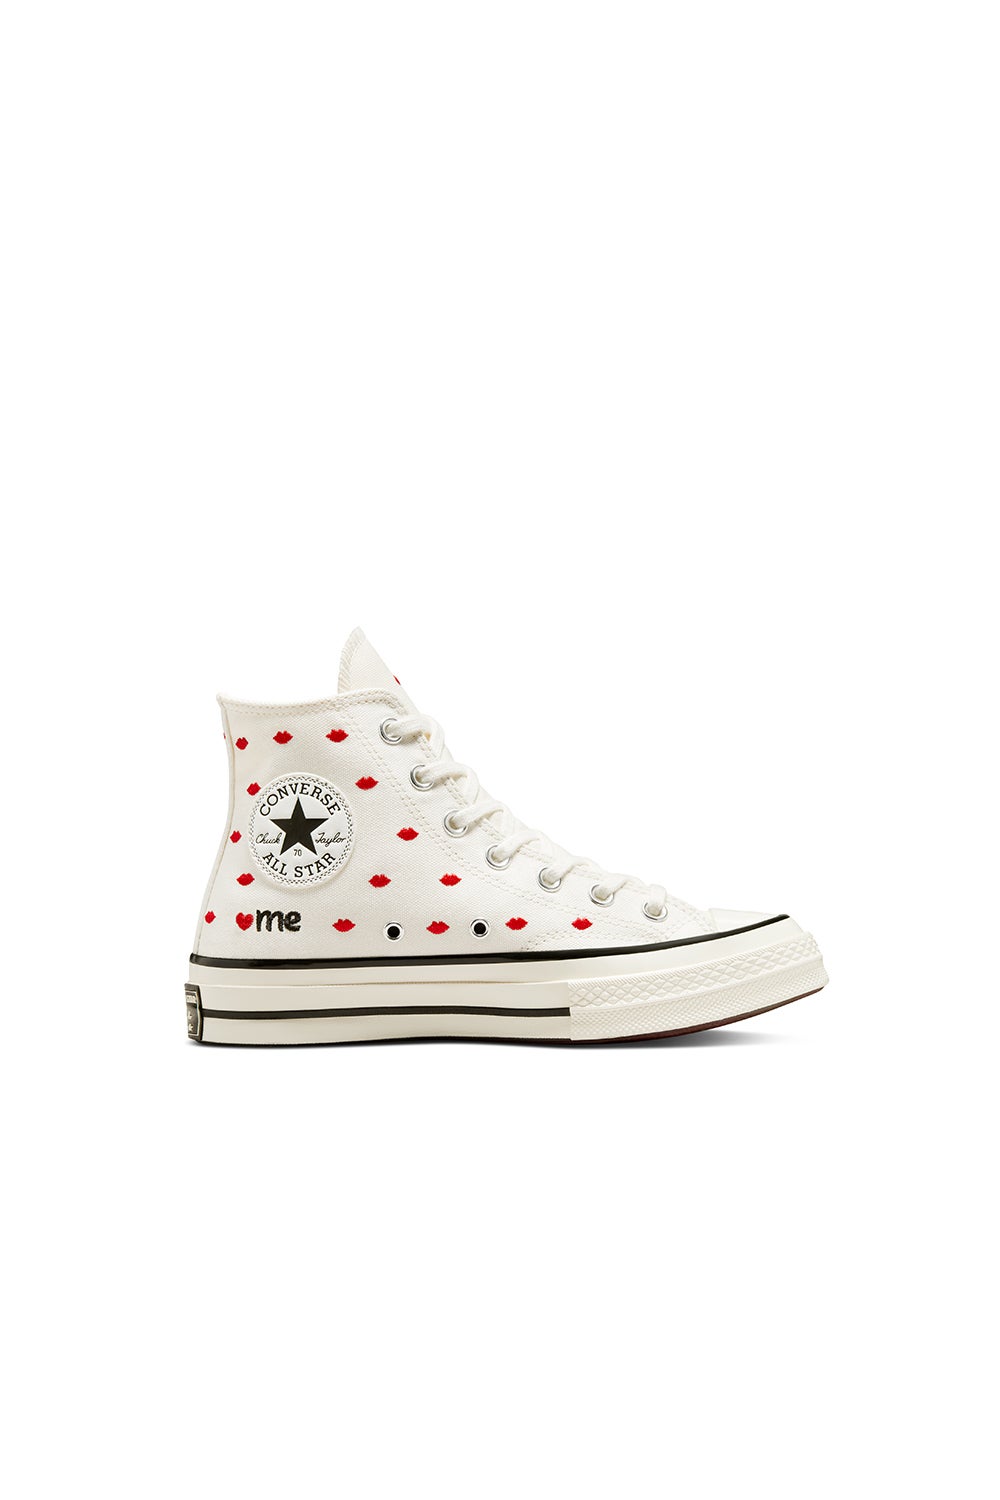 Converse Chuck 70 Crafted With Love High Top Vintage White